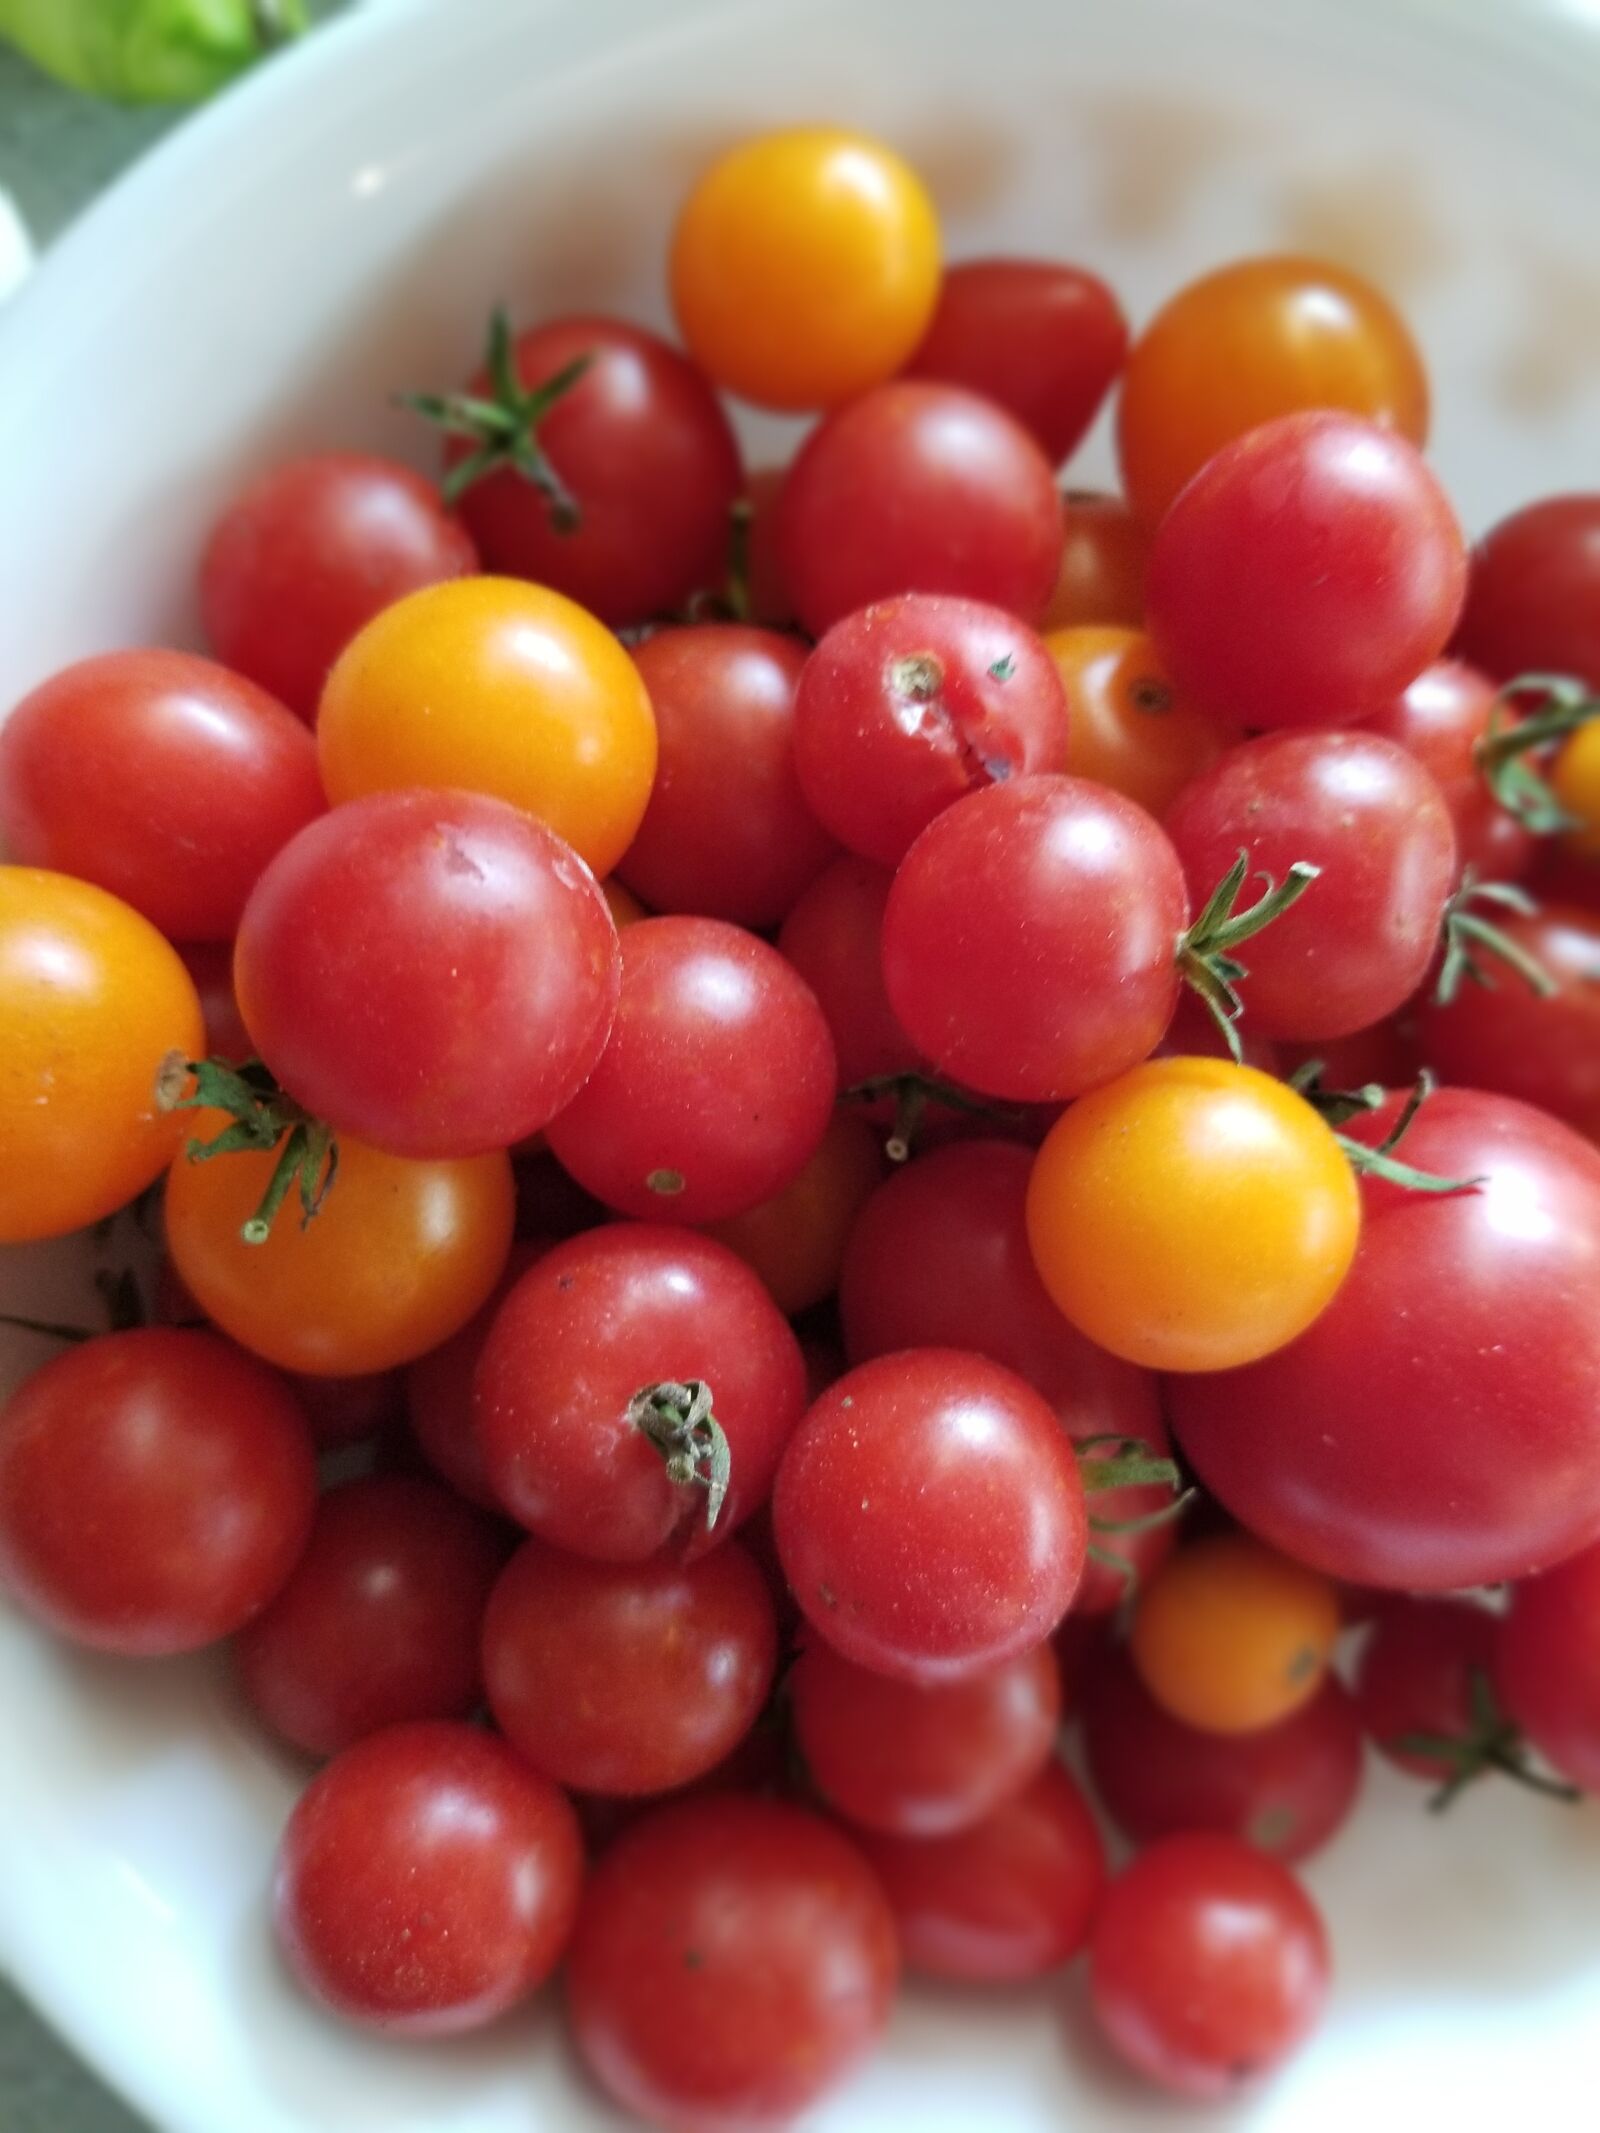 Samsung Galaxy S8+ sample photo. Cherry tomatoes, tomatoes, harvest photography